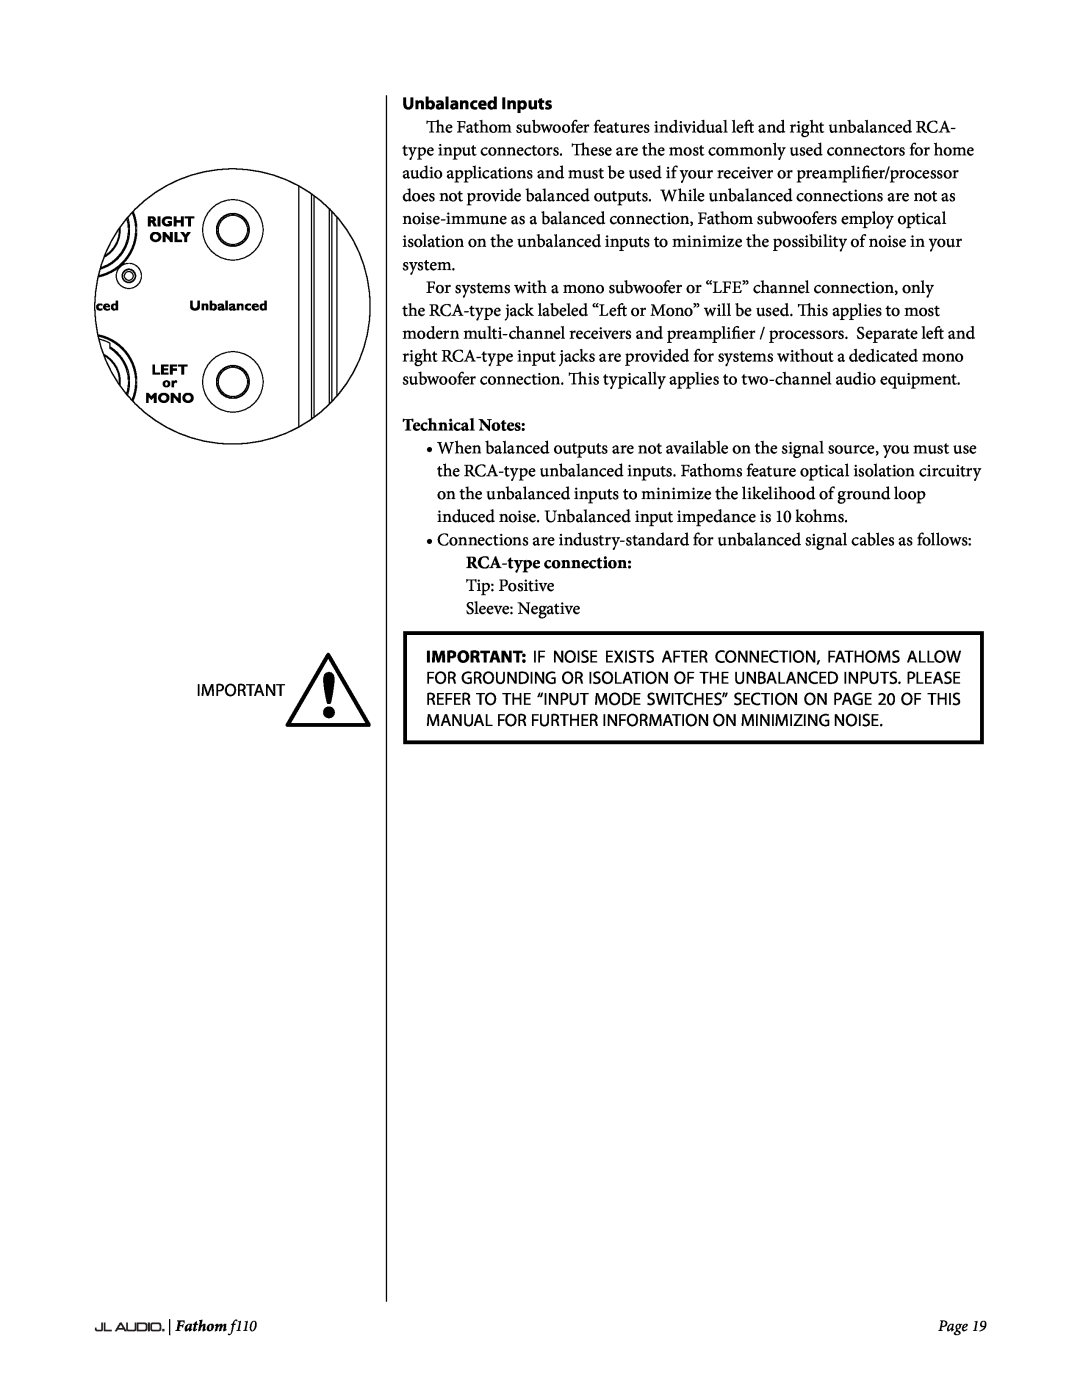 JL Audio f110 owner manual Unbalanced Inputs, RCA-typeconnection Tip Positive, Technical Notes 